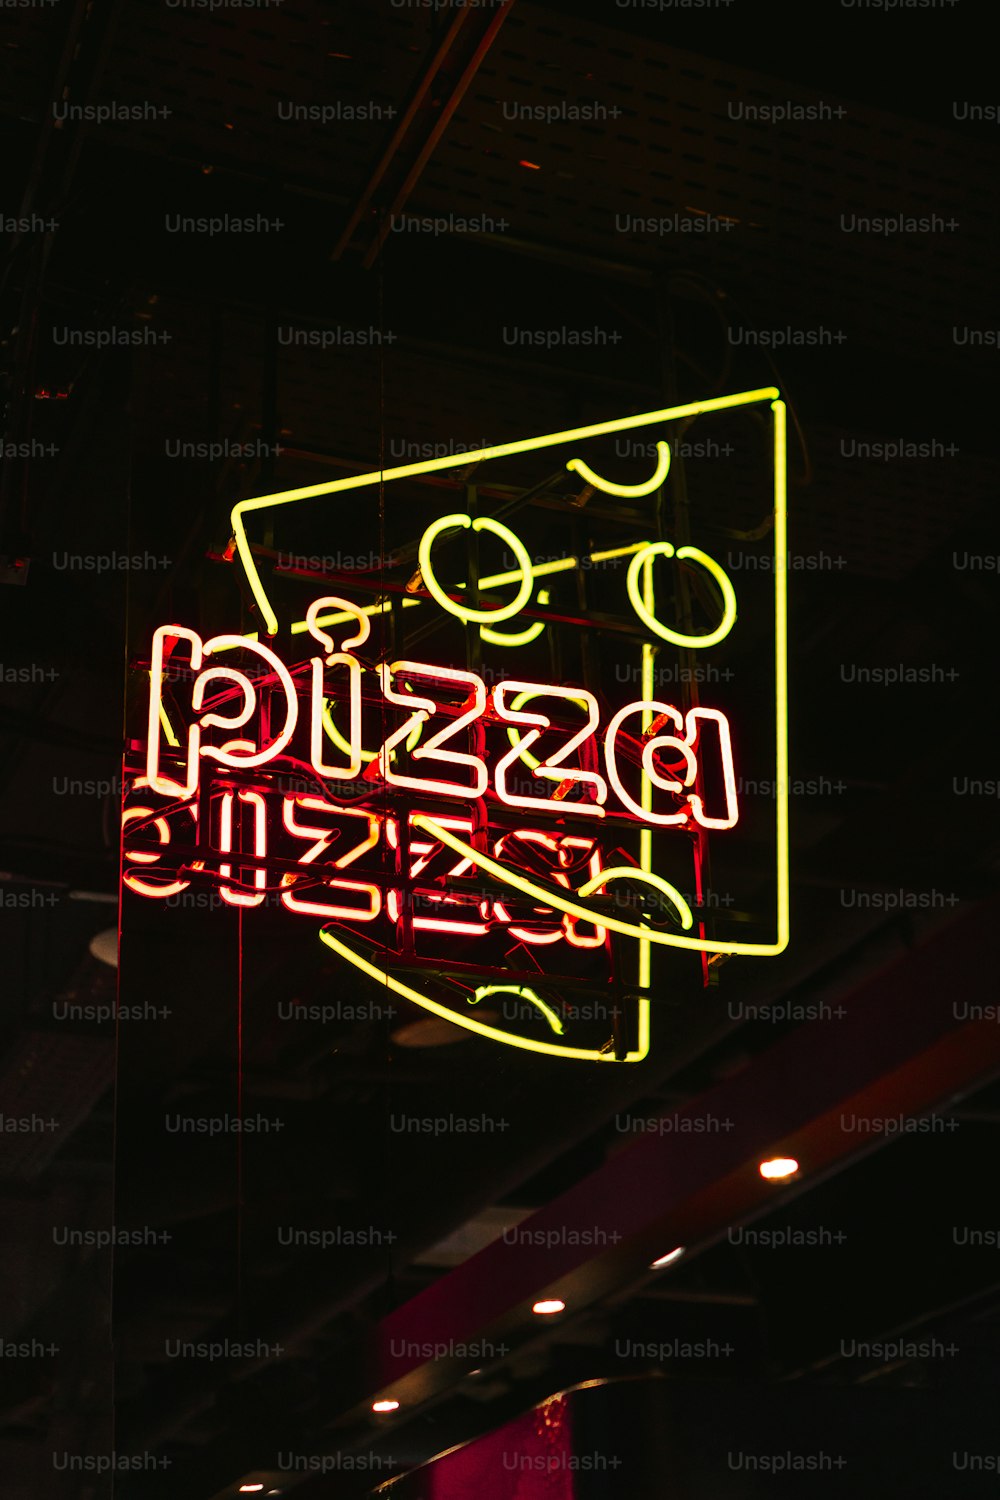 a neon sign hanging from the ceiling of a building